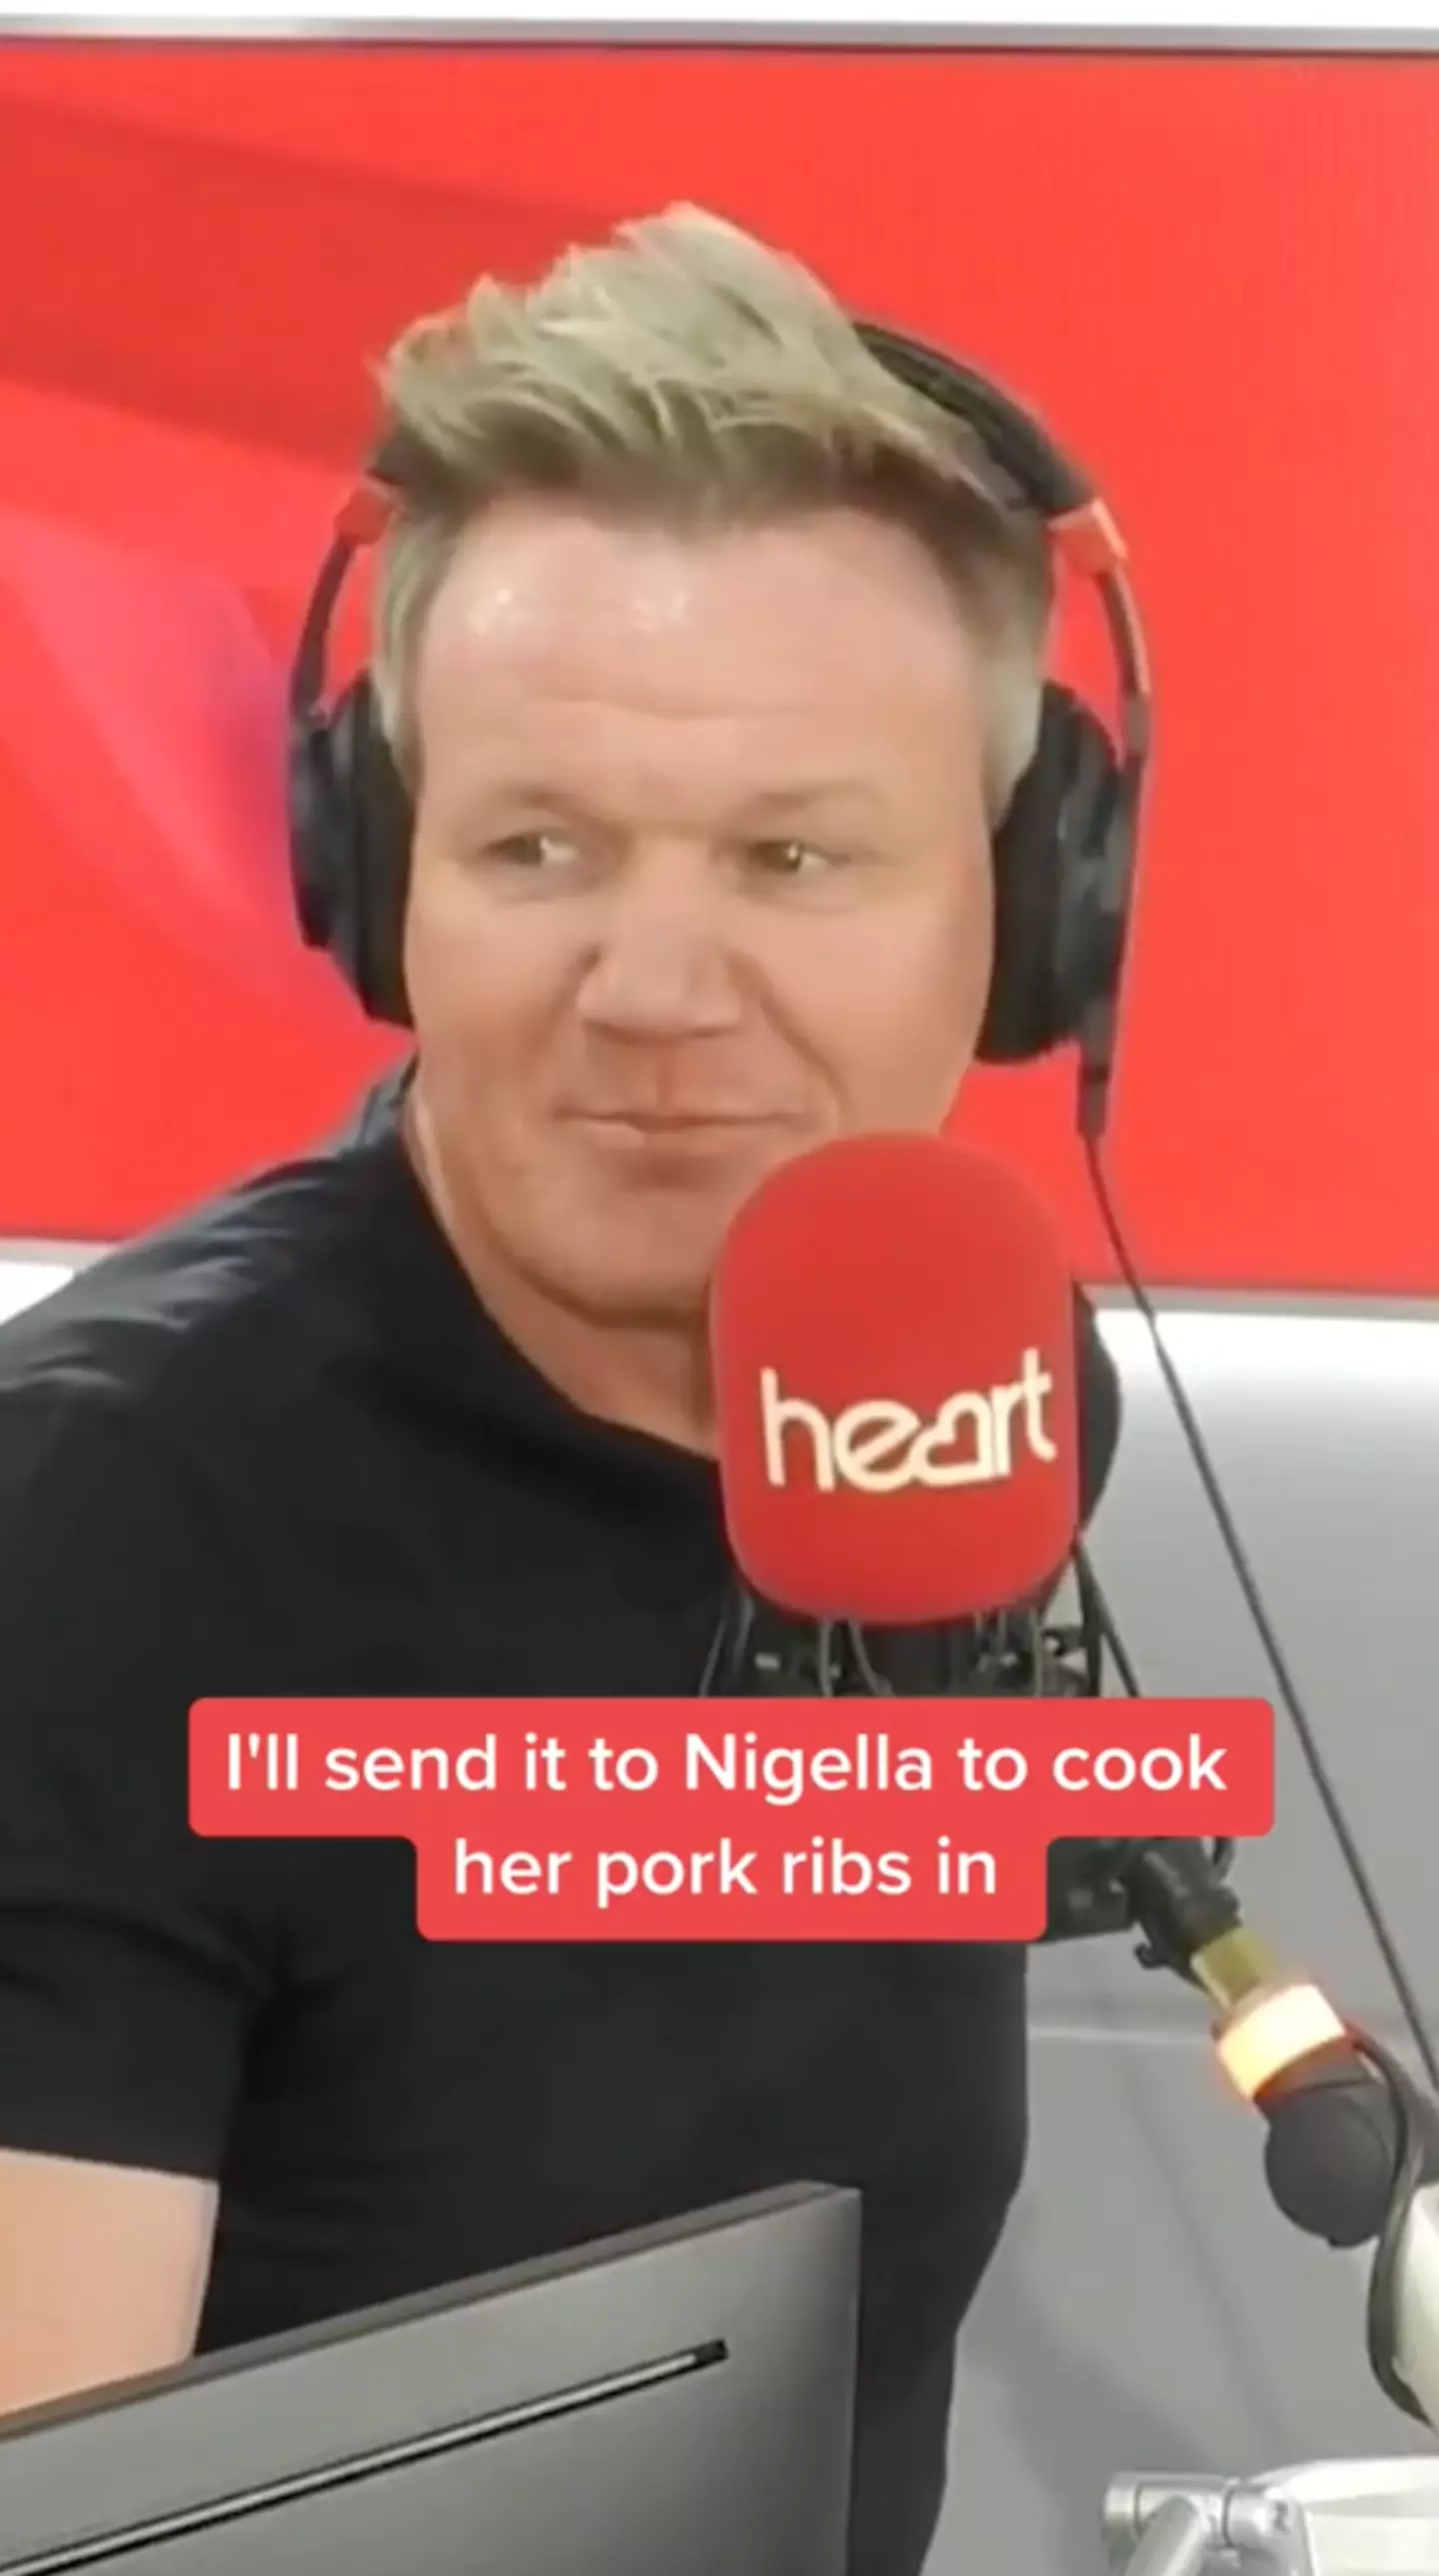 Nigella Lawson could be receiving a bottle of Prime from Gordon Ramsay by the sound of things.